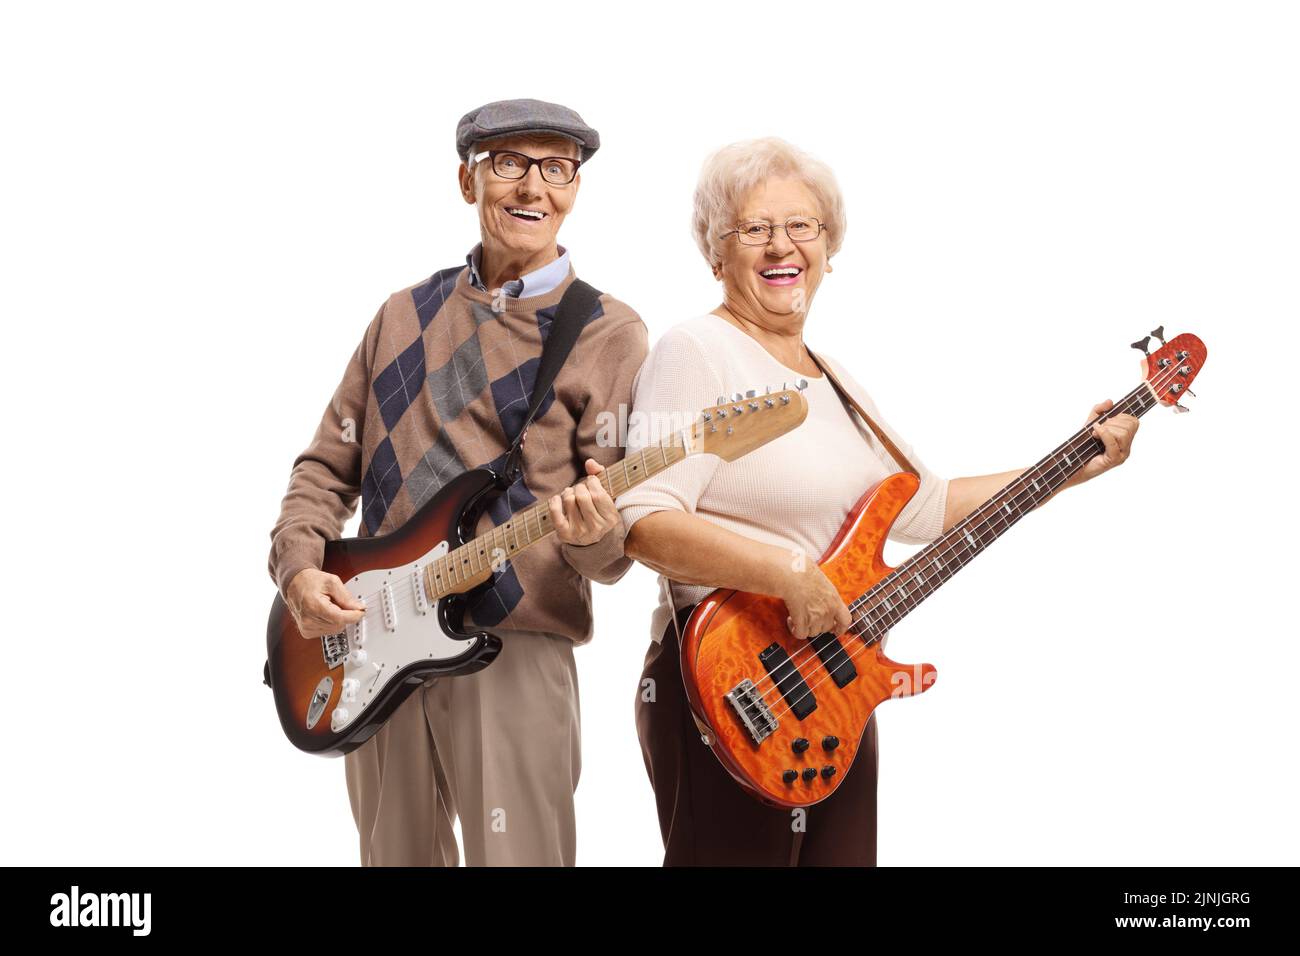 Elderly man and woman playing electric guitars and smiling isolated on white background Stock Photo